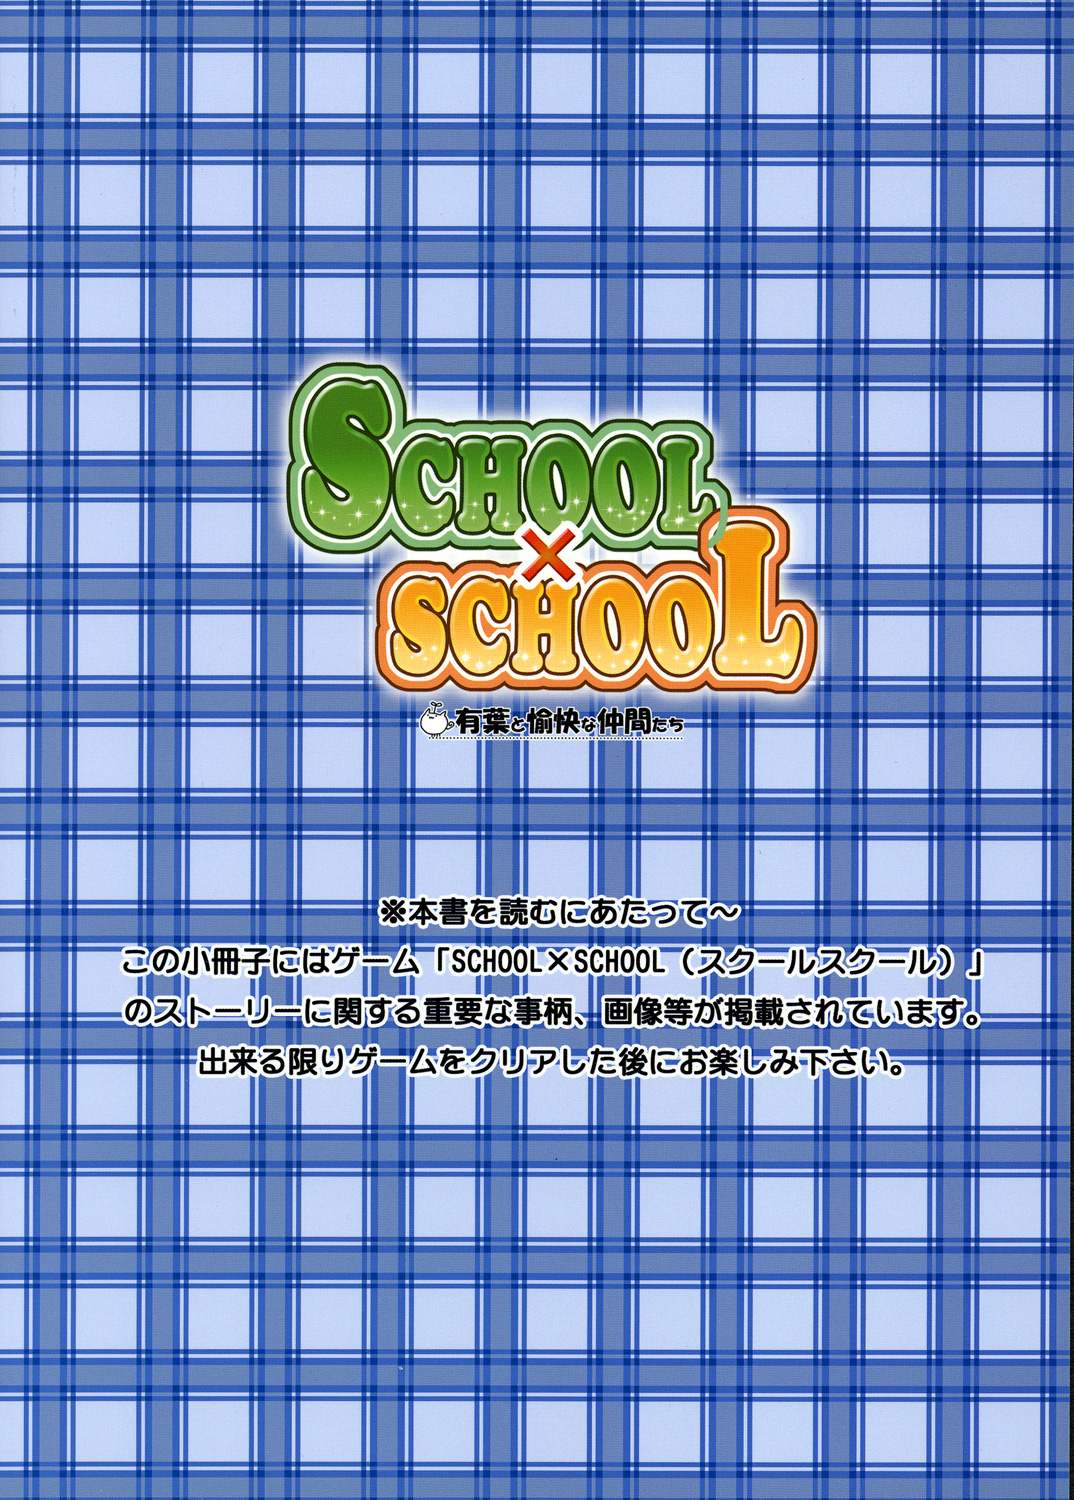 [AKABEi SOFT] SCHOOL×SCHOLL Visual Guide page 23 full